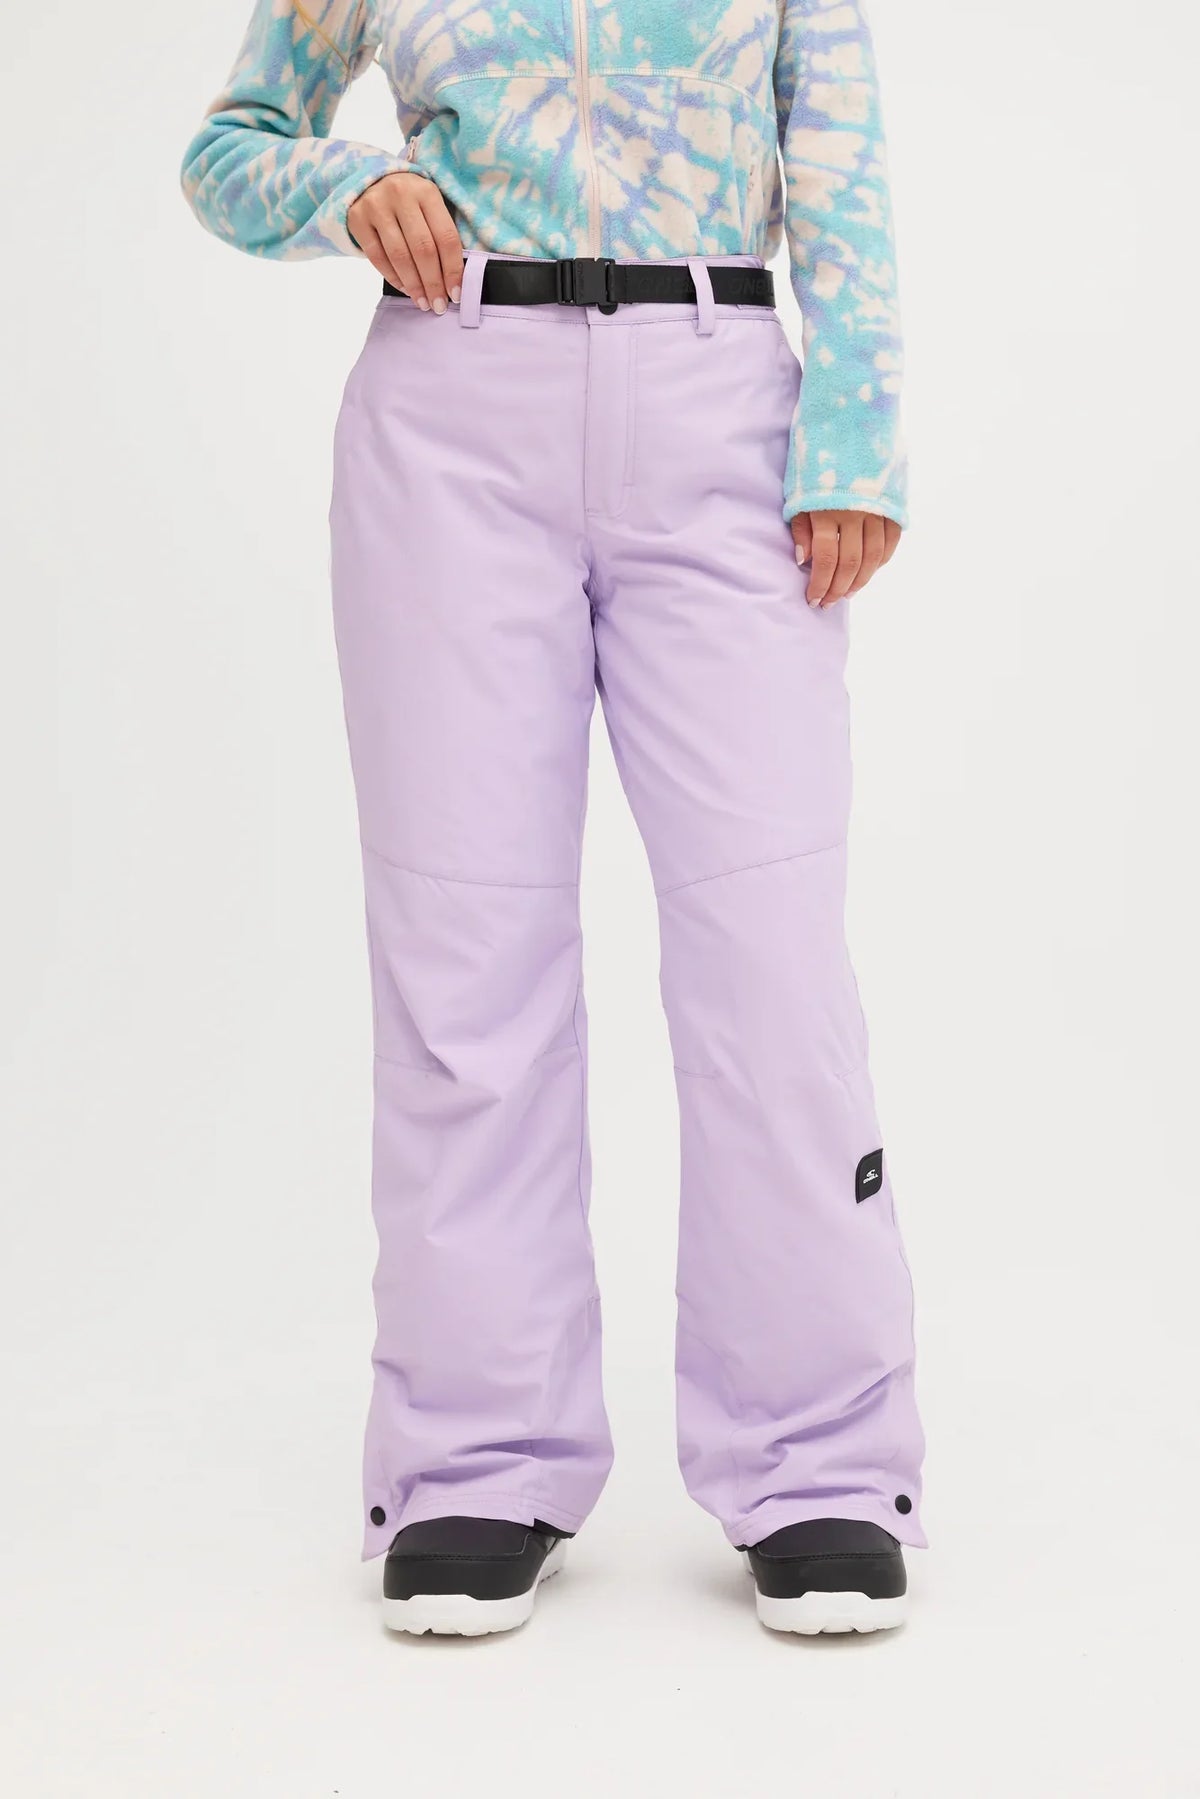 Oneill Star Slim Snow Pants Womens in Conch Shell - TRIGGER BROS.  SURFBOARDS PTY. LTD.